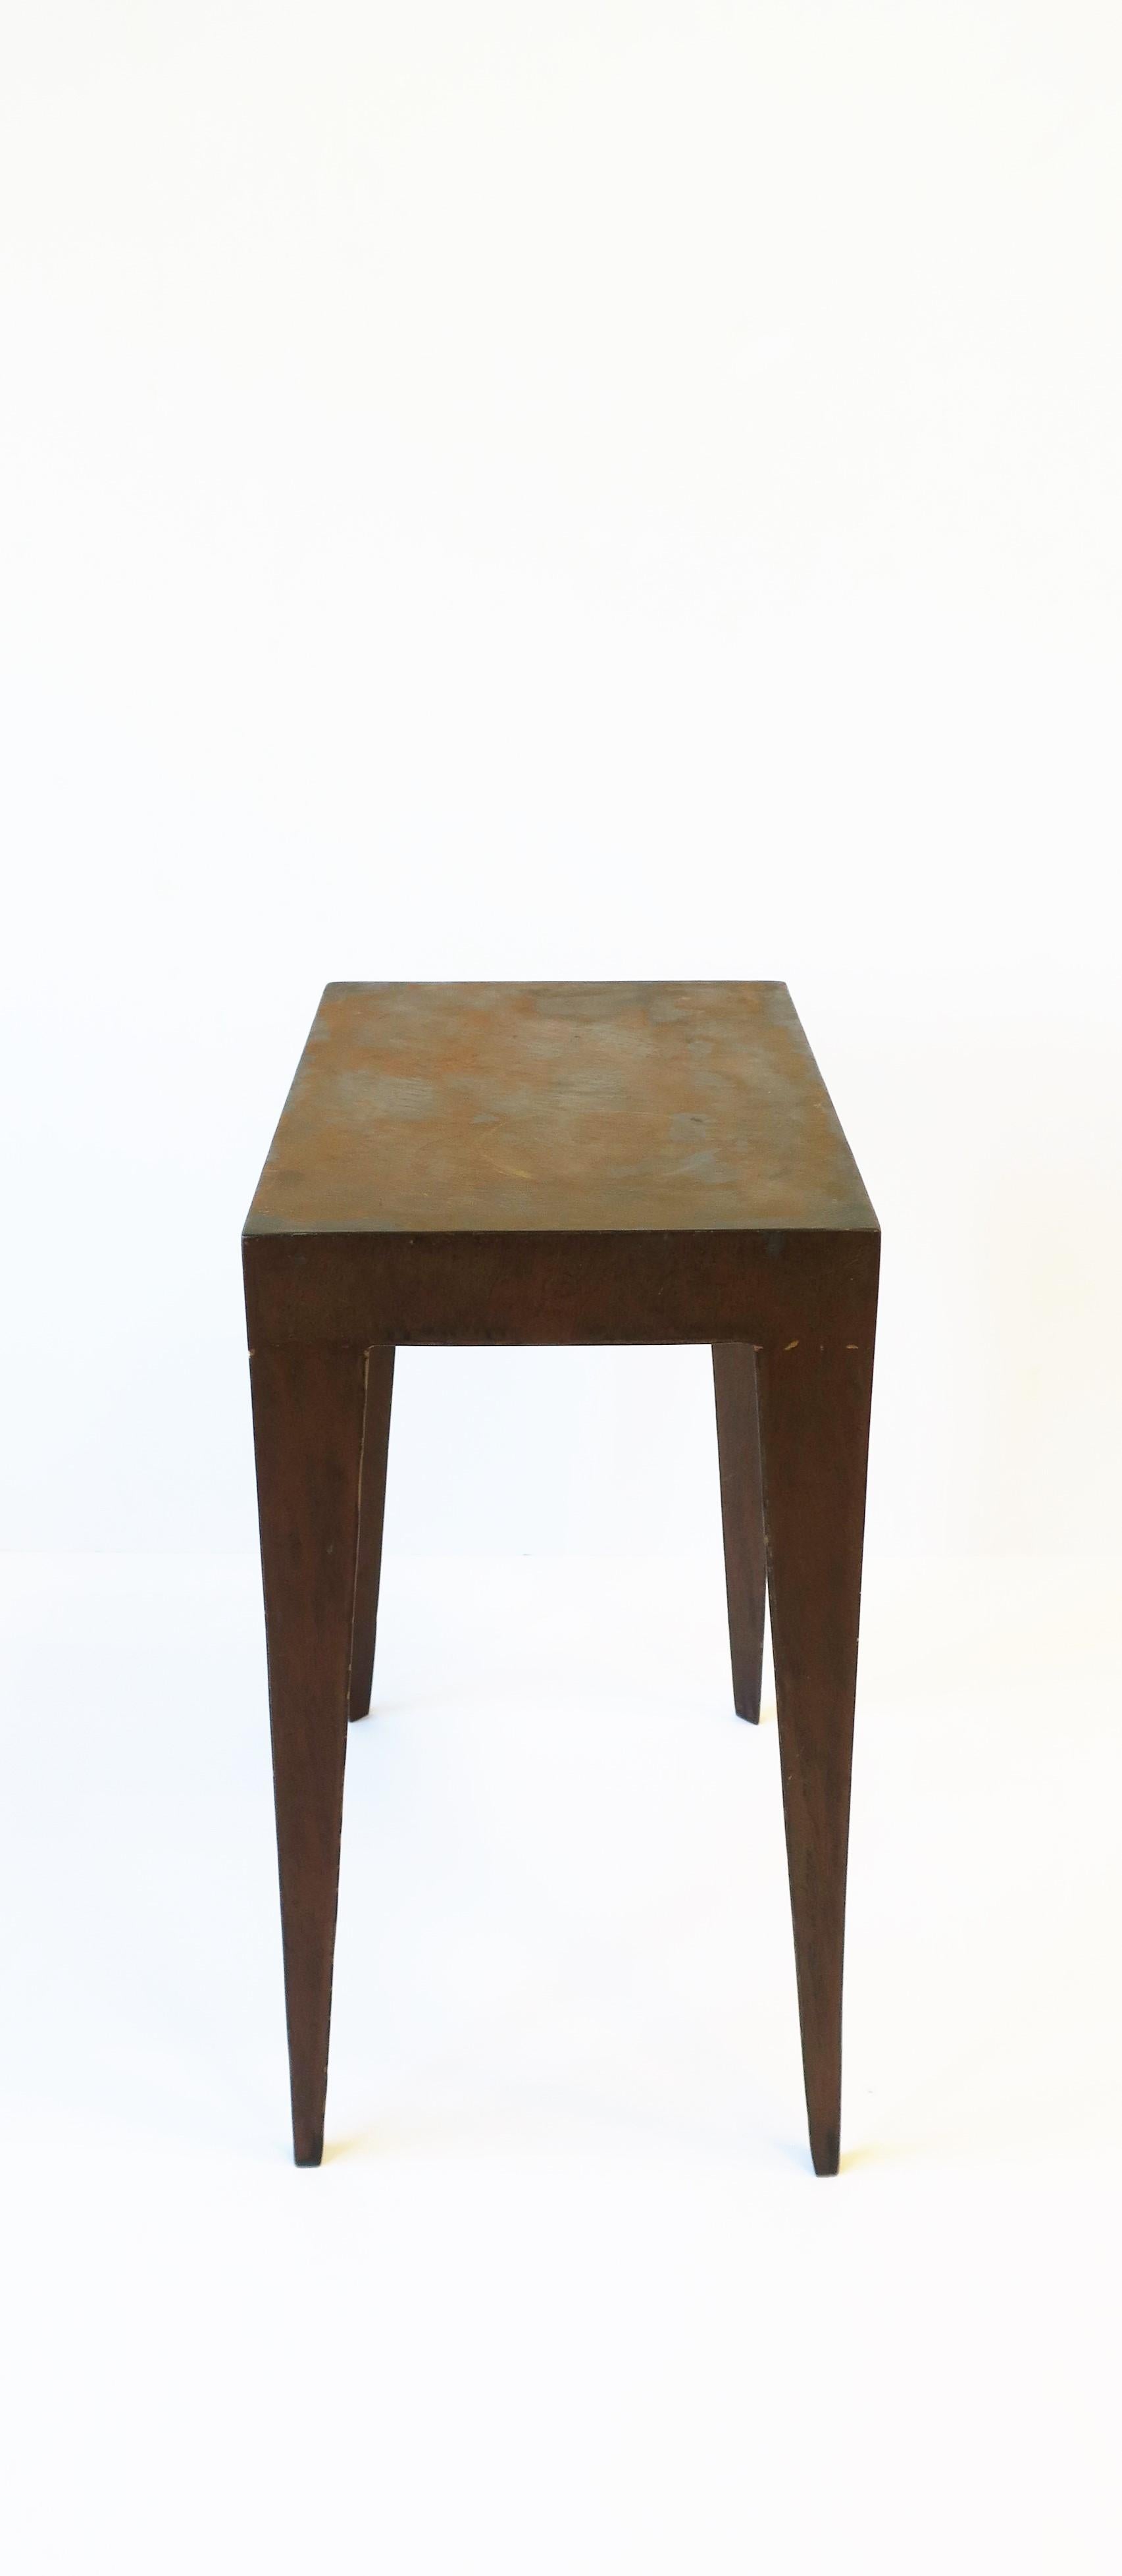 Minimalist Metal Side End Drinks Table with Art Deco Influence For Sale 5